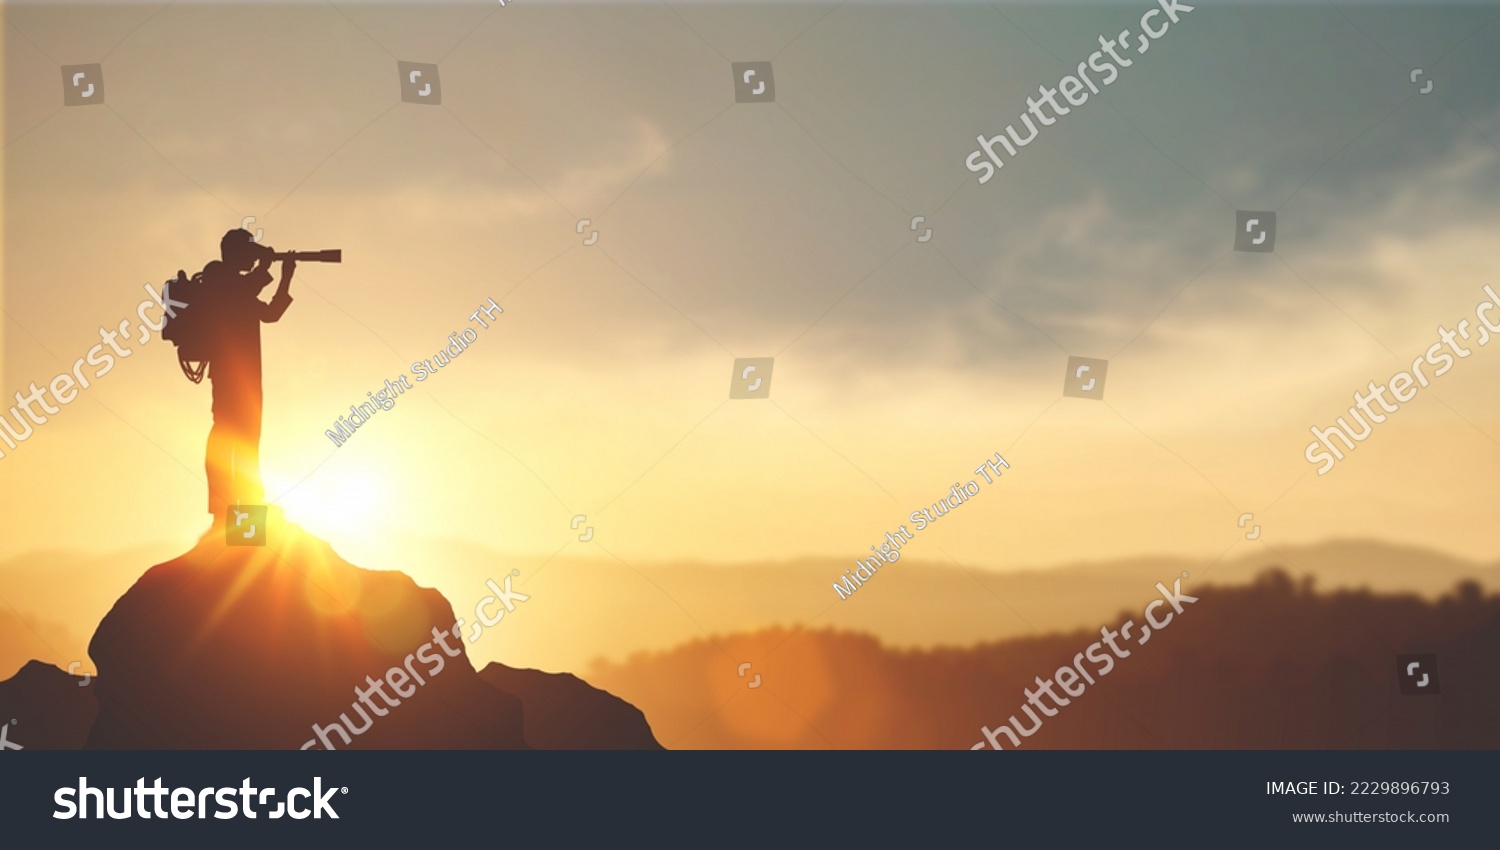 vision for success ideas. businessman's perspective for future planning. Silhouette of man holding binoculars on mountain peak against bright sunlight sky background. #2229896793